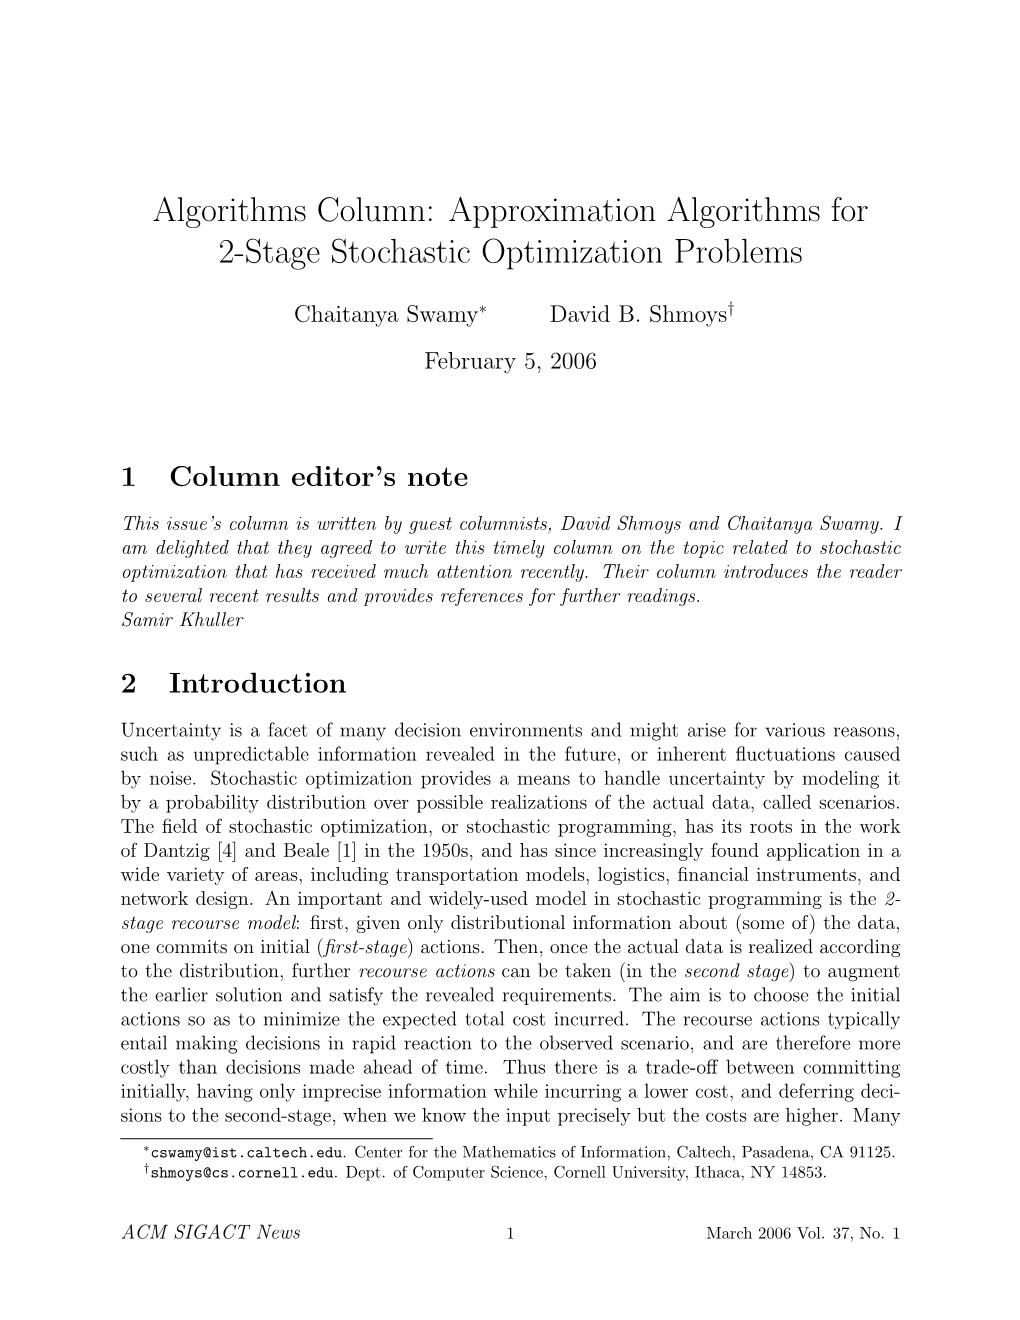 Approximation Algorithms for 2-Stage Stochastic Optimization Problems